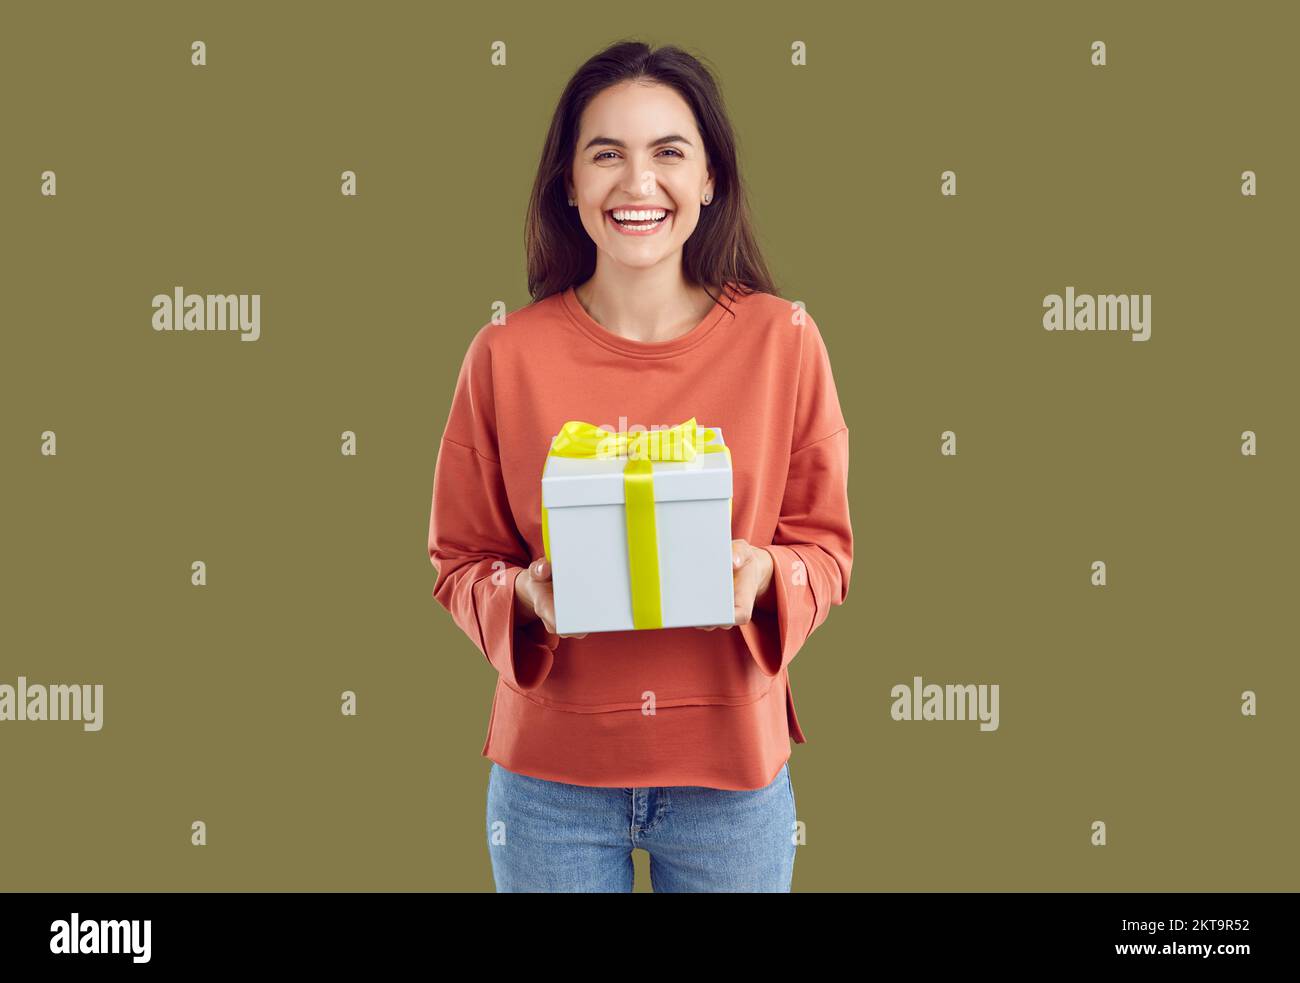 Happy laughing brunette woman in red sweatshirt is holding a present in hands on khaki background. Stock Photo